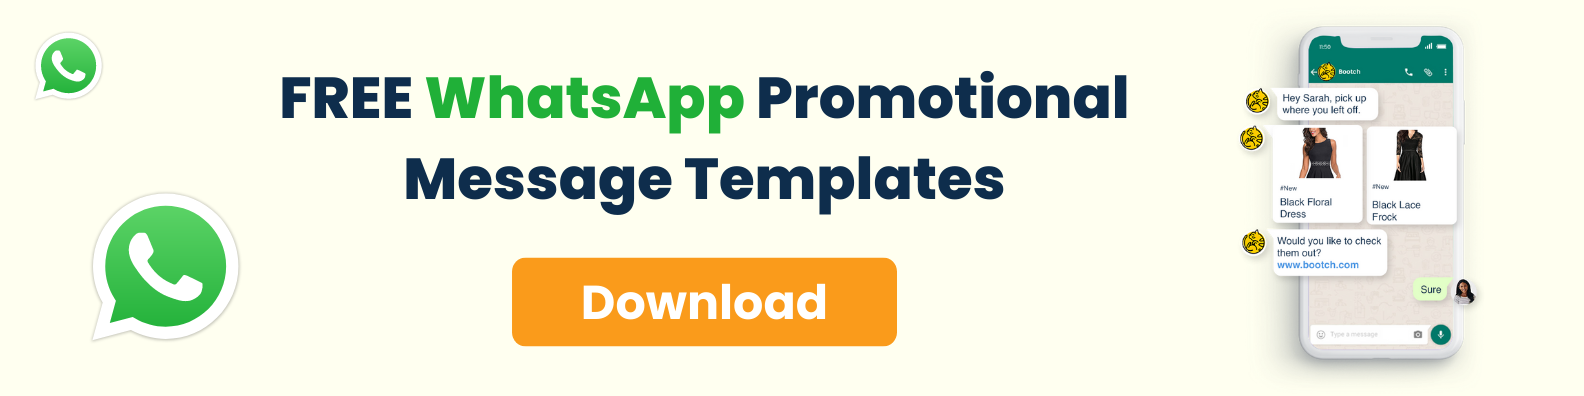 free whatsapp promotional message templates